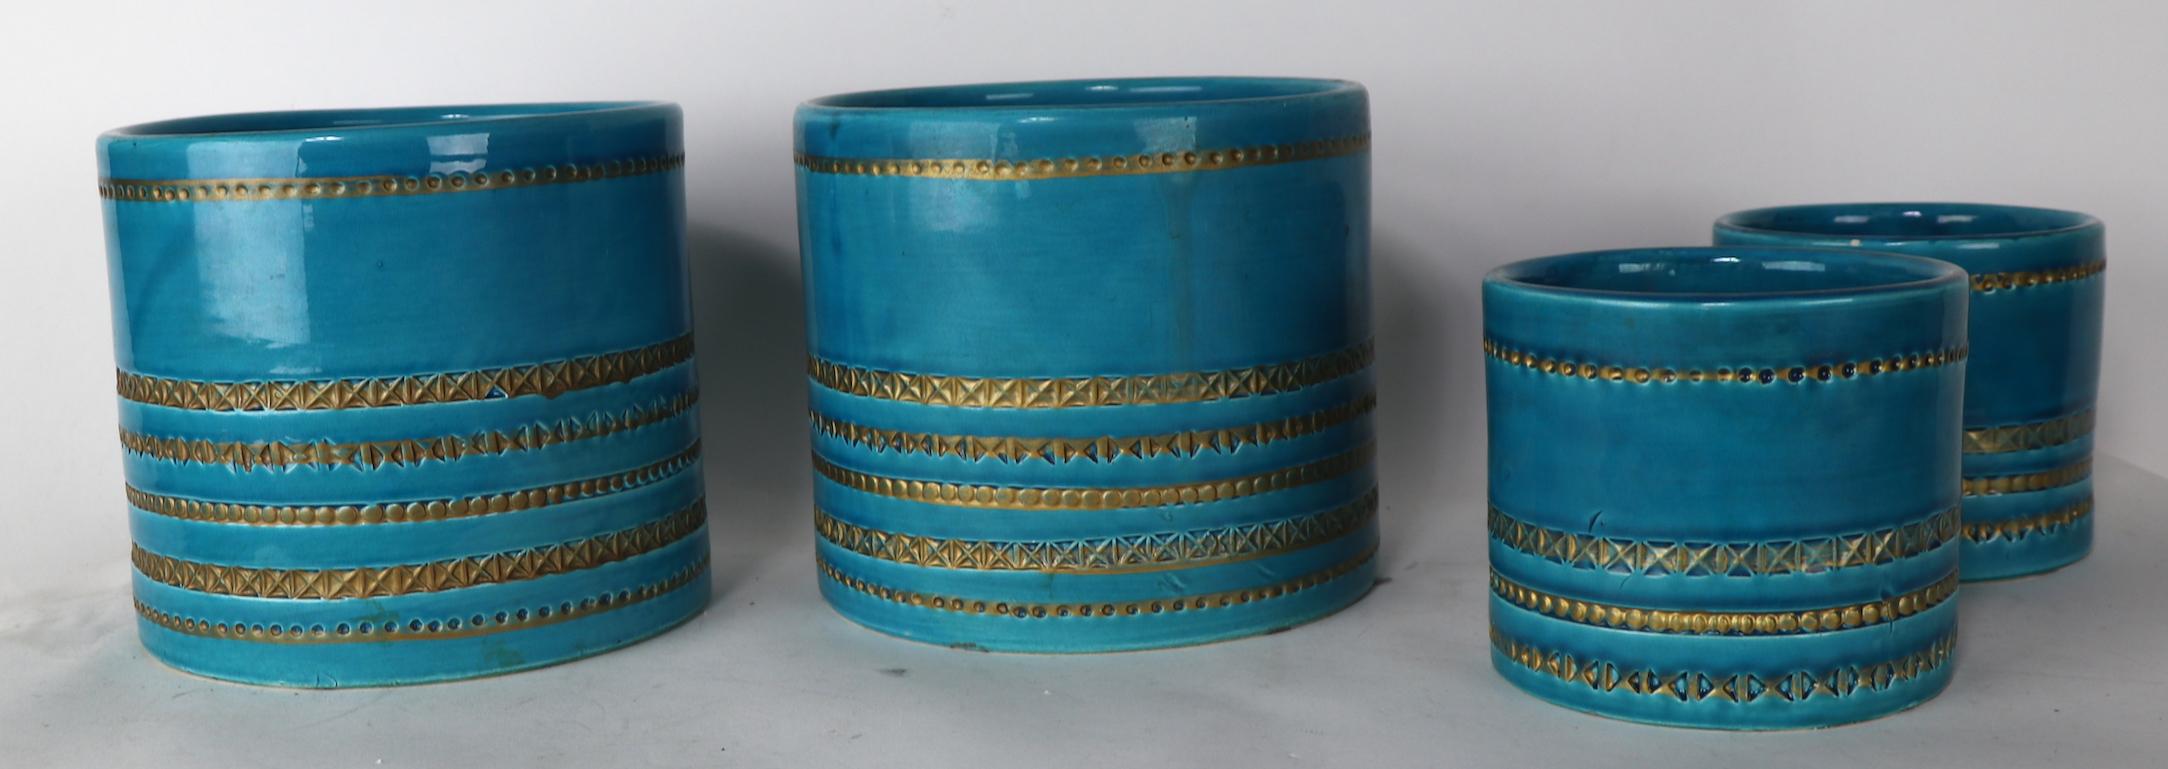 Group of four Italian pottery flower pots, two larger (6.25 height inches x 7 diameter) and two smaller (4.25 height x 5 diameter) the two smaller pots are marked on bottom, as shown. One small pot has insignificant glaze flake chip at top edge rim,